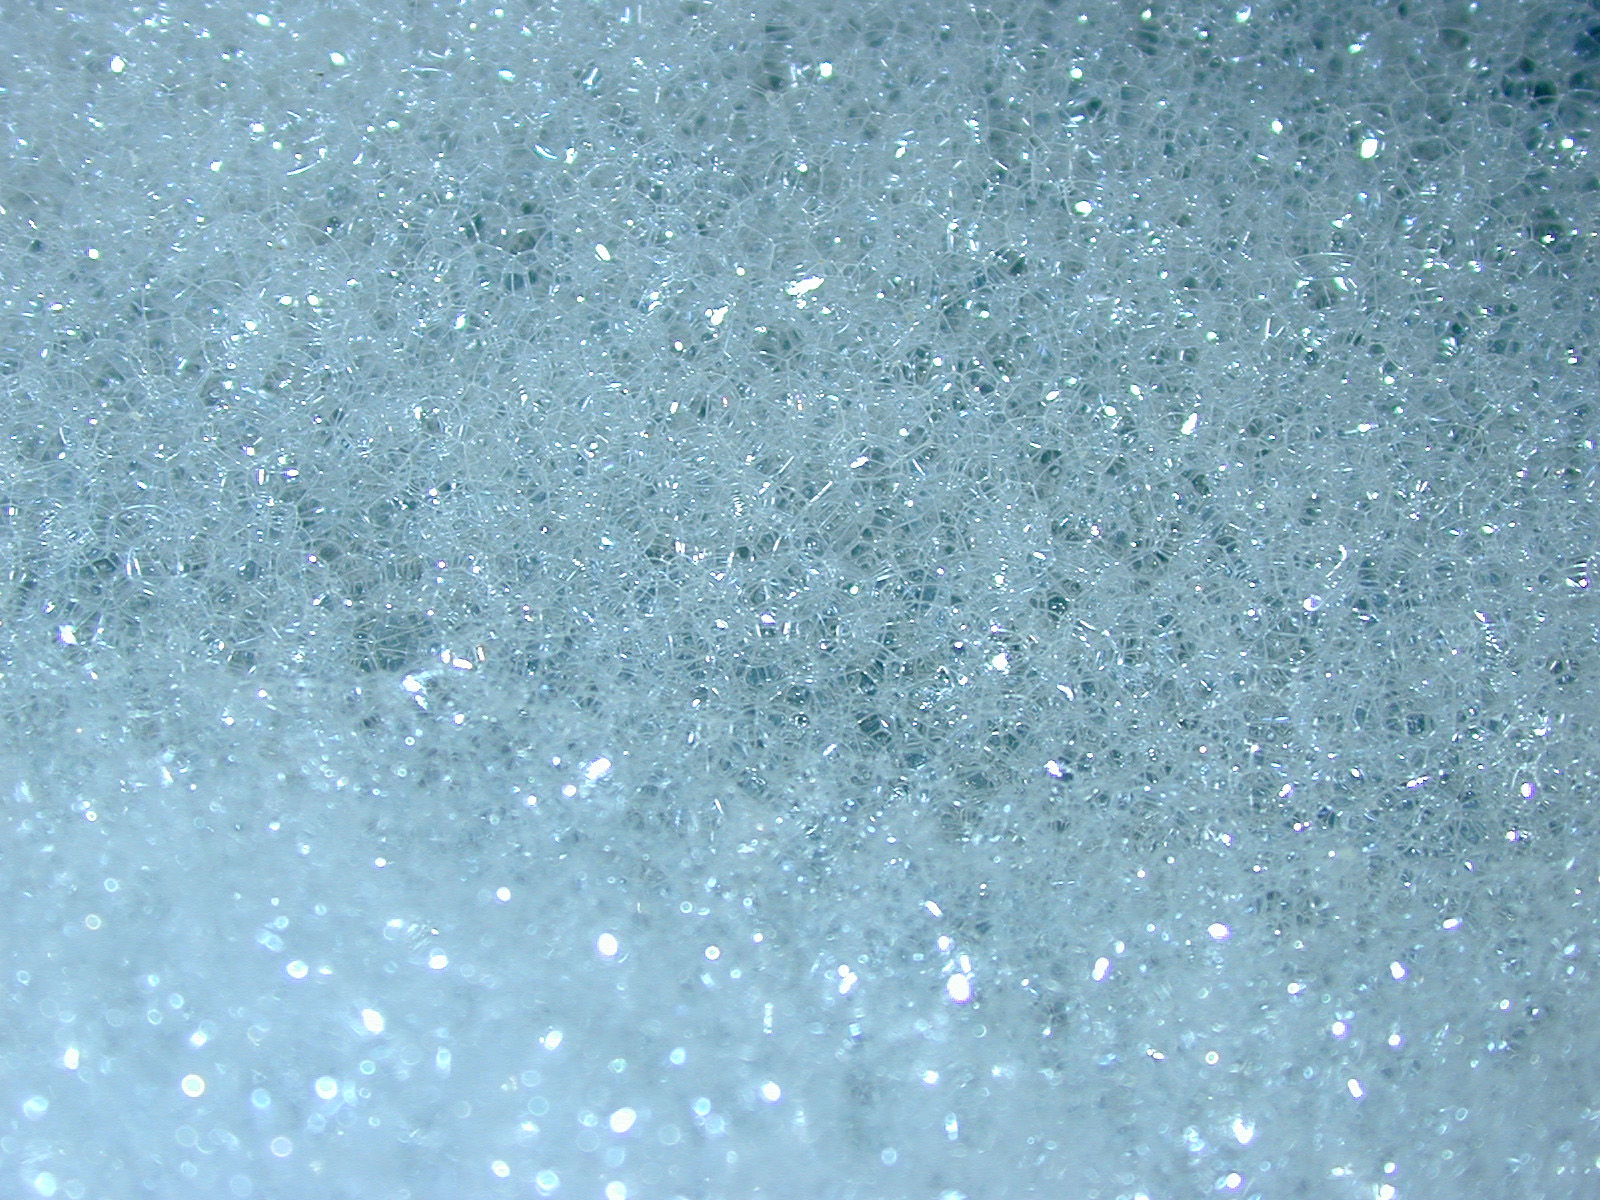 foam bubbles | Free backgrounds and textures | Cr103.com